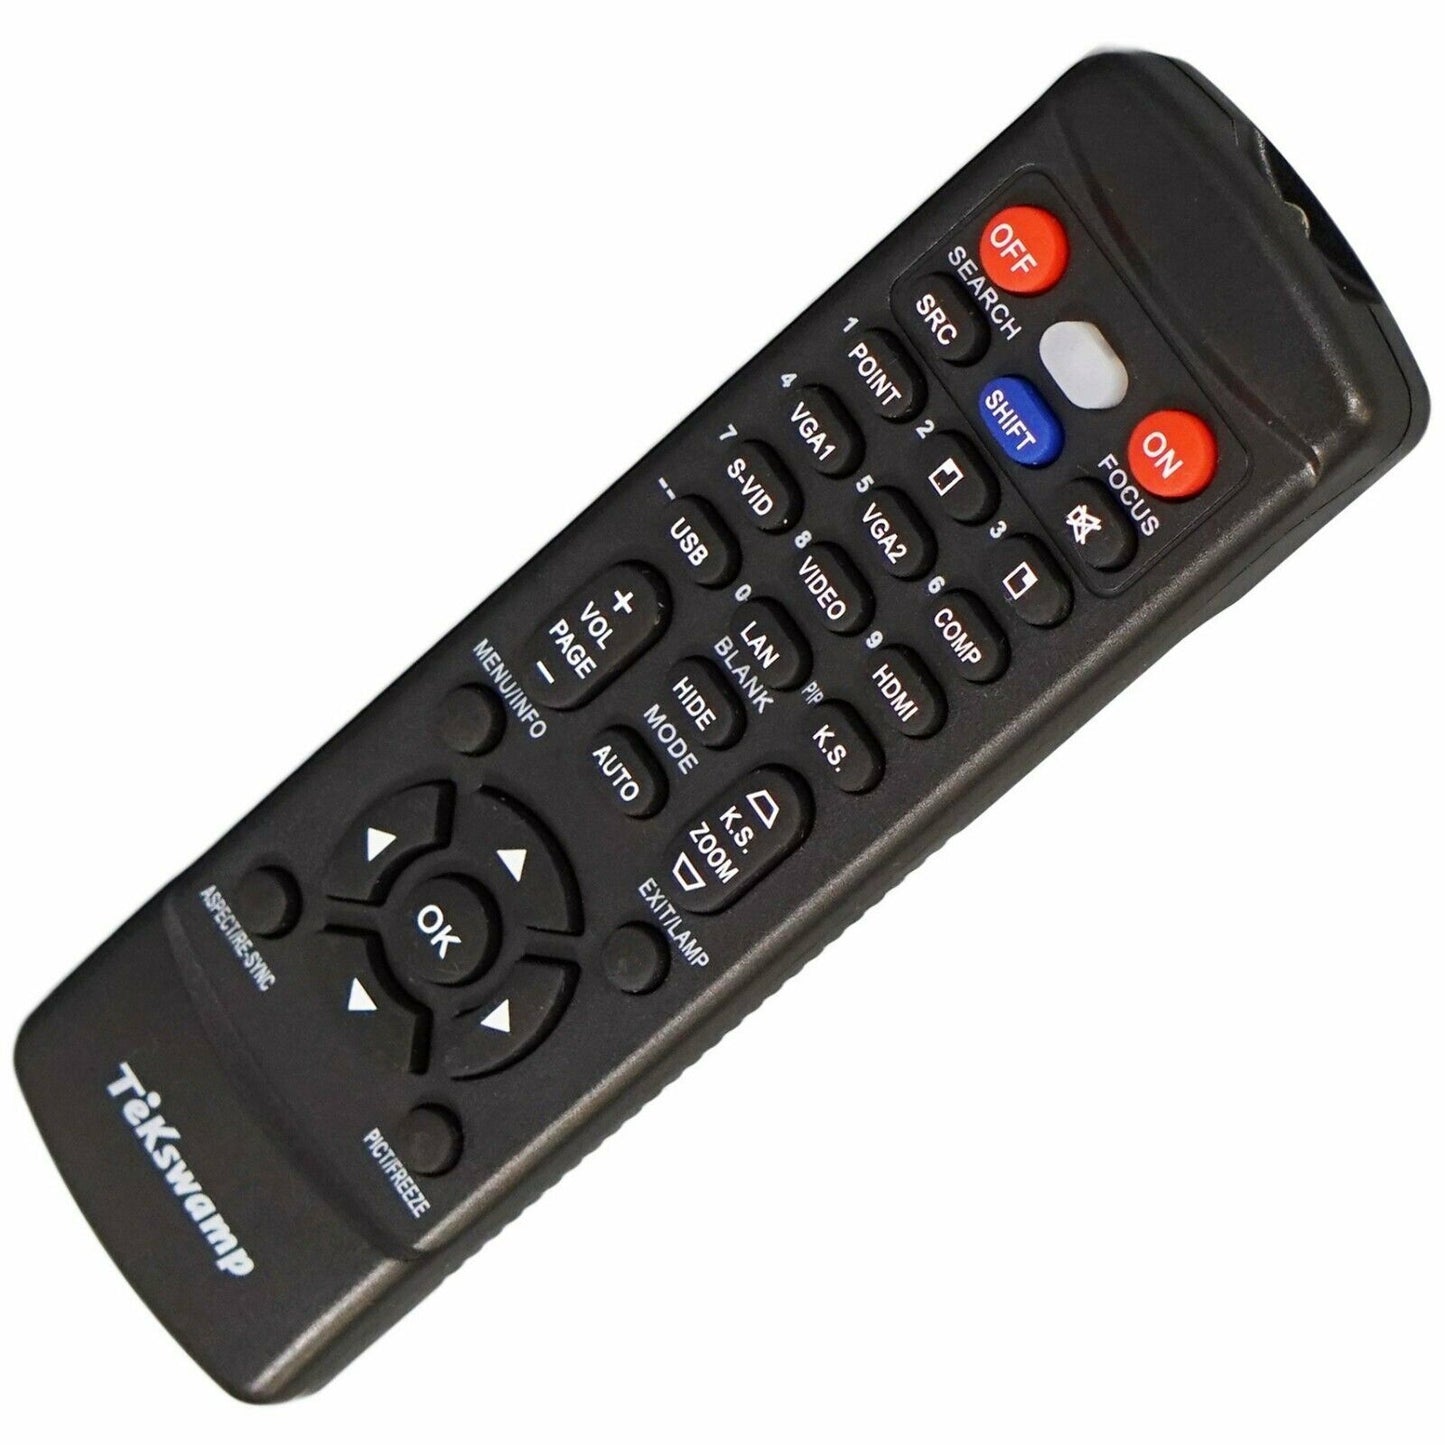 NEW Projector Remote Control For Epson EB-X11H EB-S11H EB-X14H EH-TW480 EB-S9